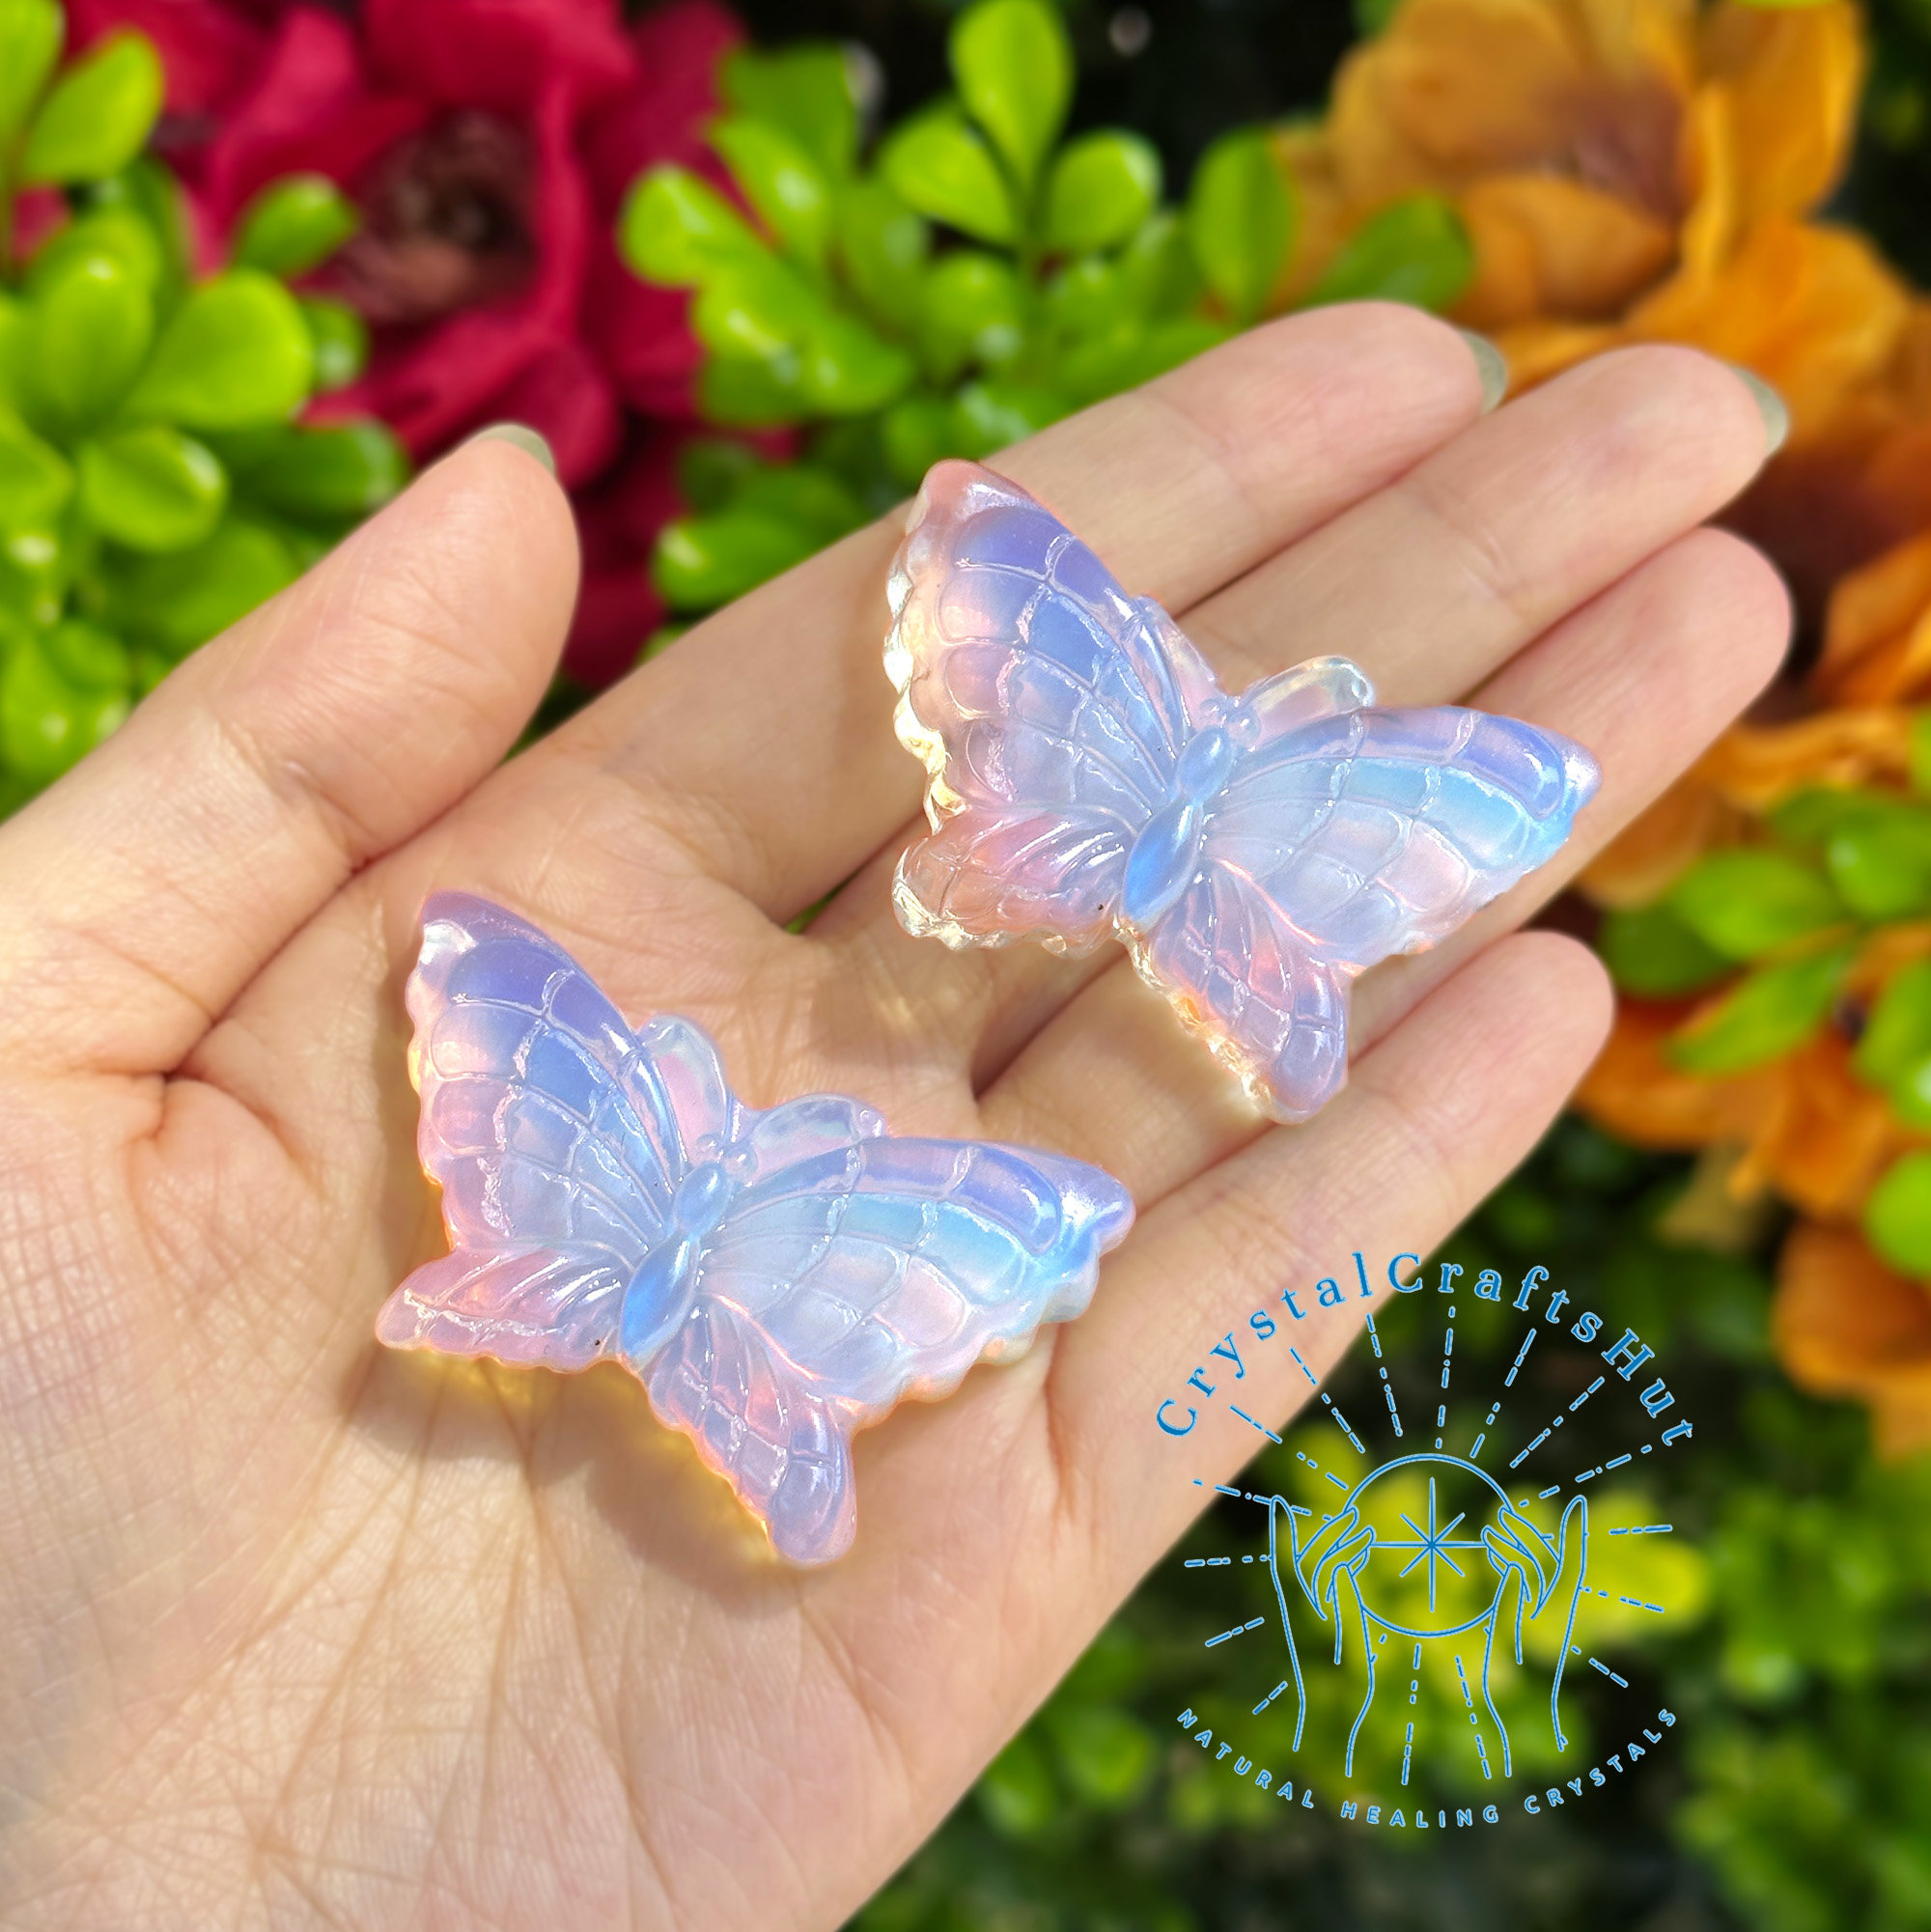 Crystal Amber Resin Butterfly Figurines Paperweights Crafts